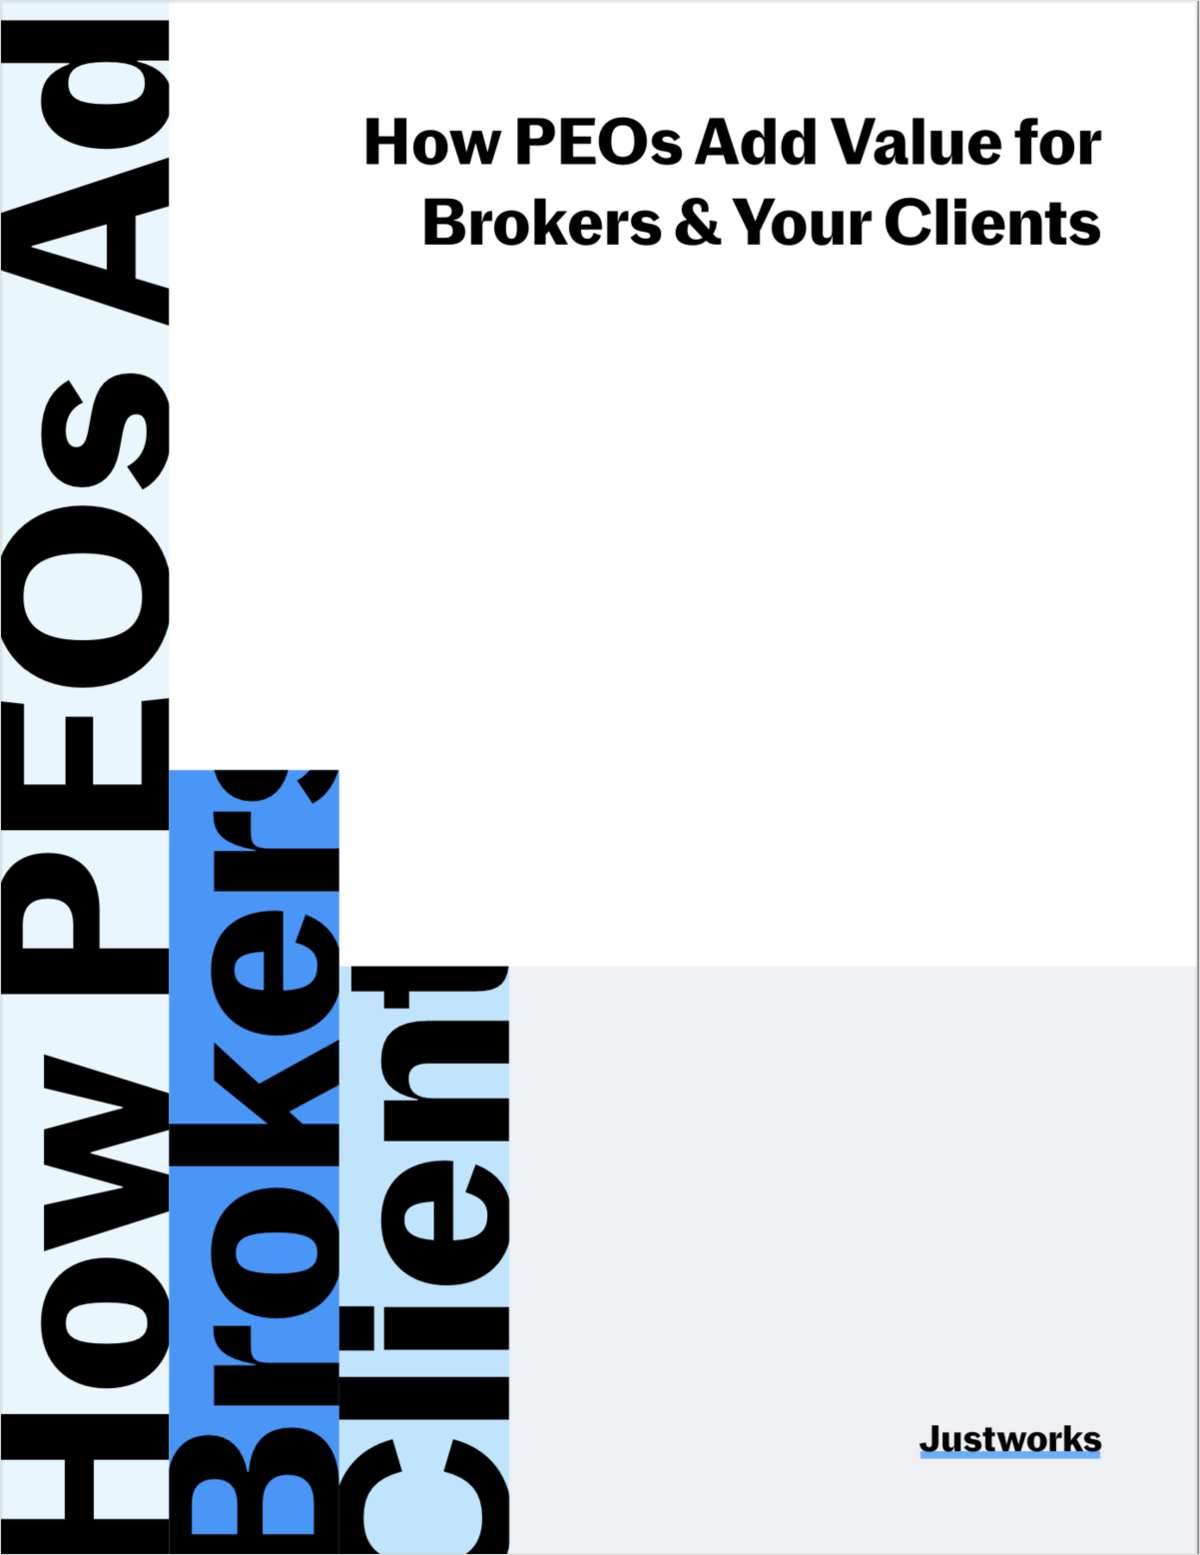 How PEOs Add Value For Brokers & Your Clients